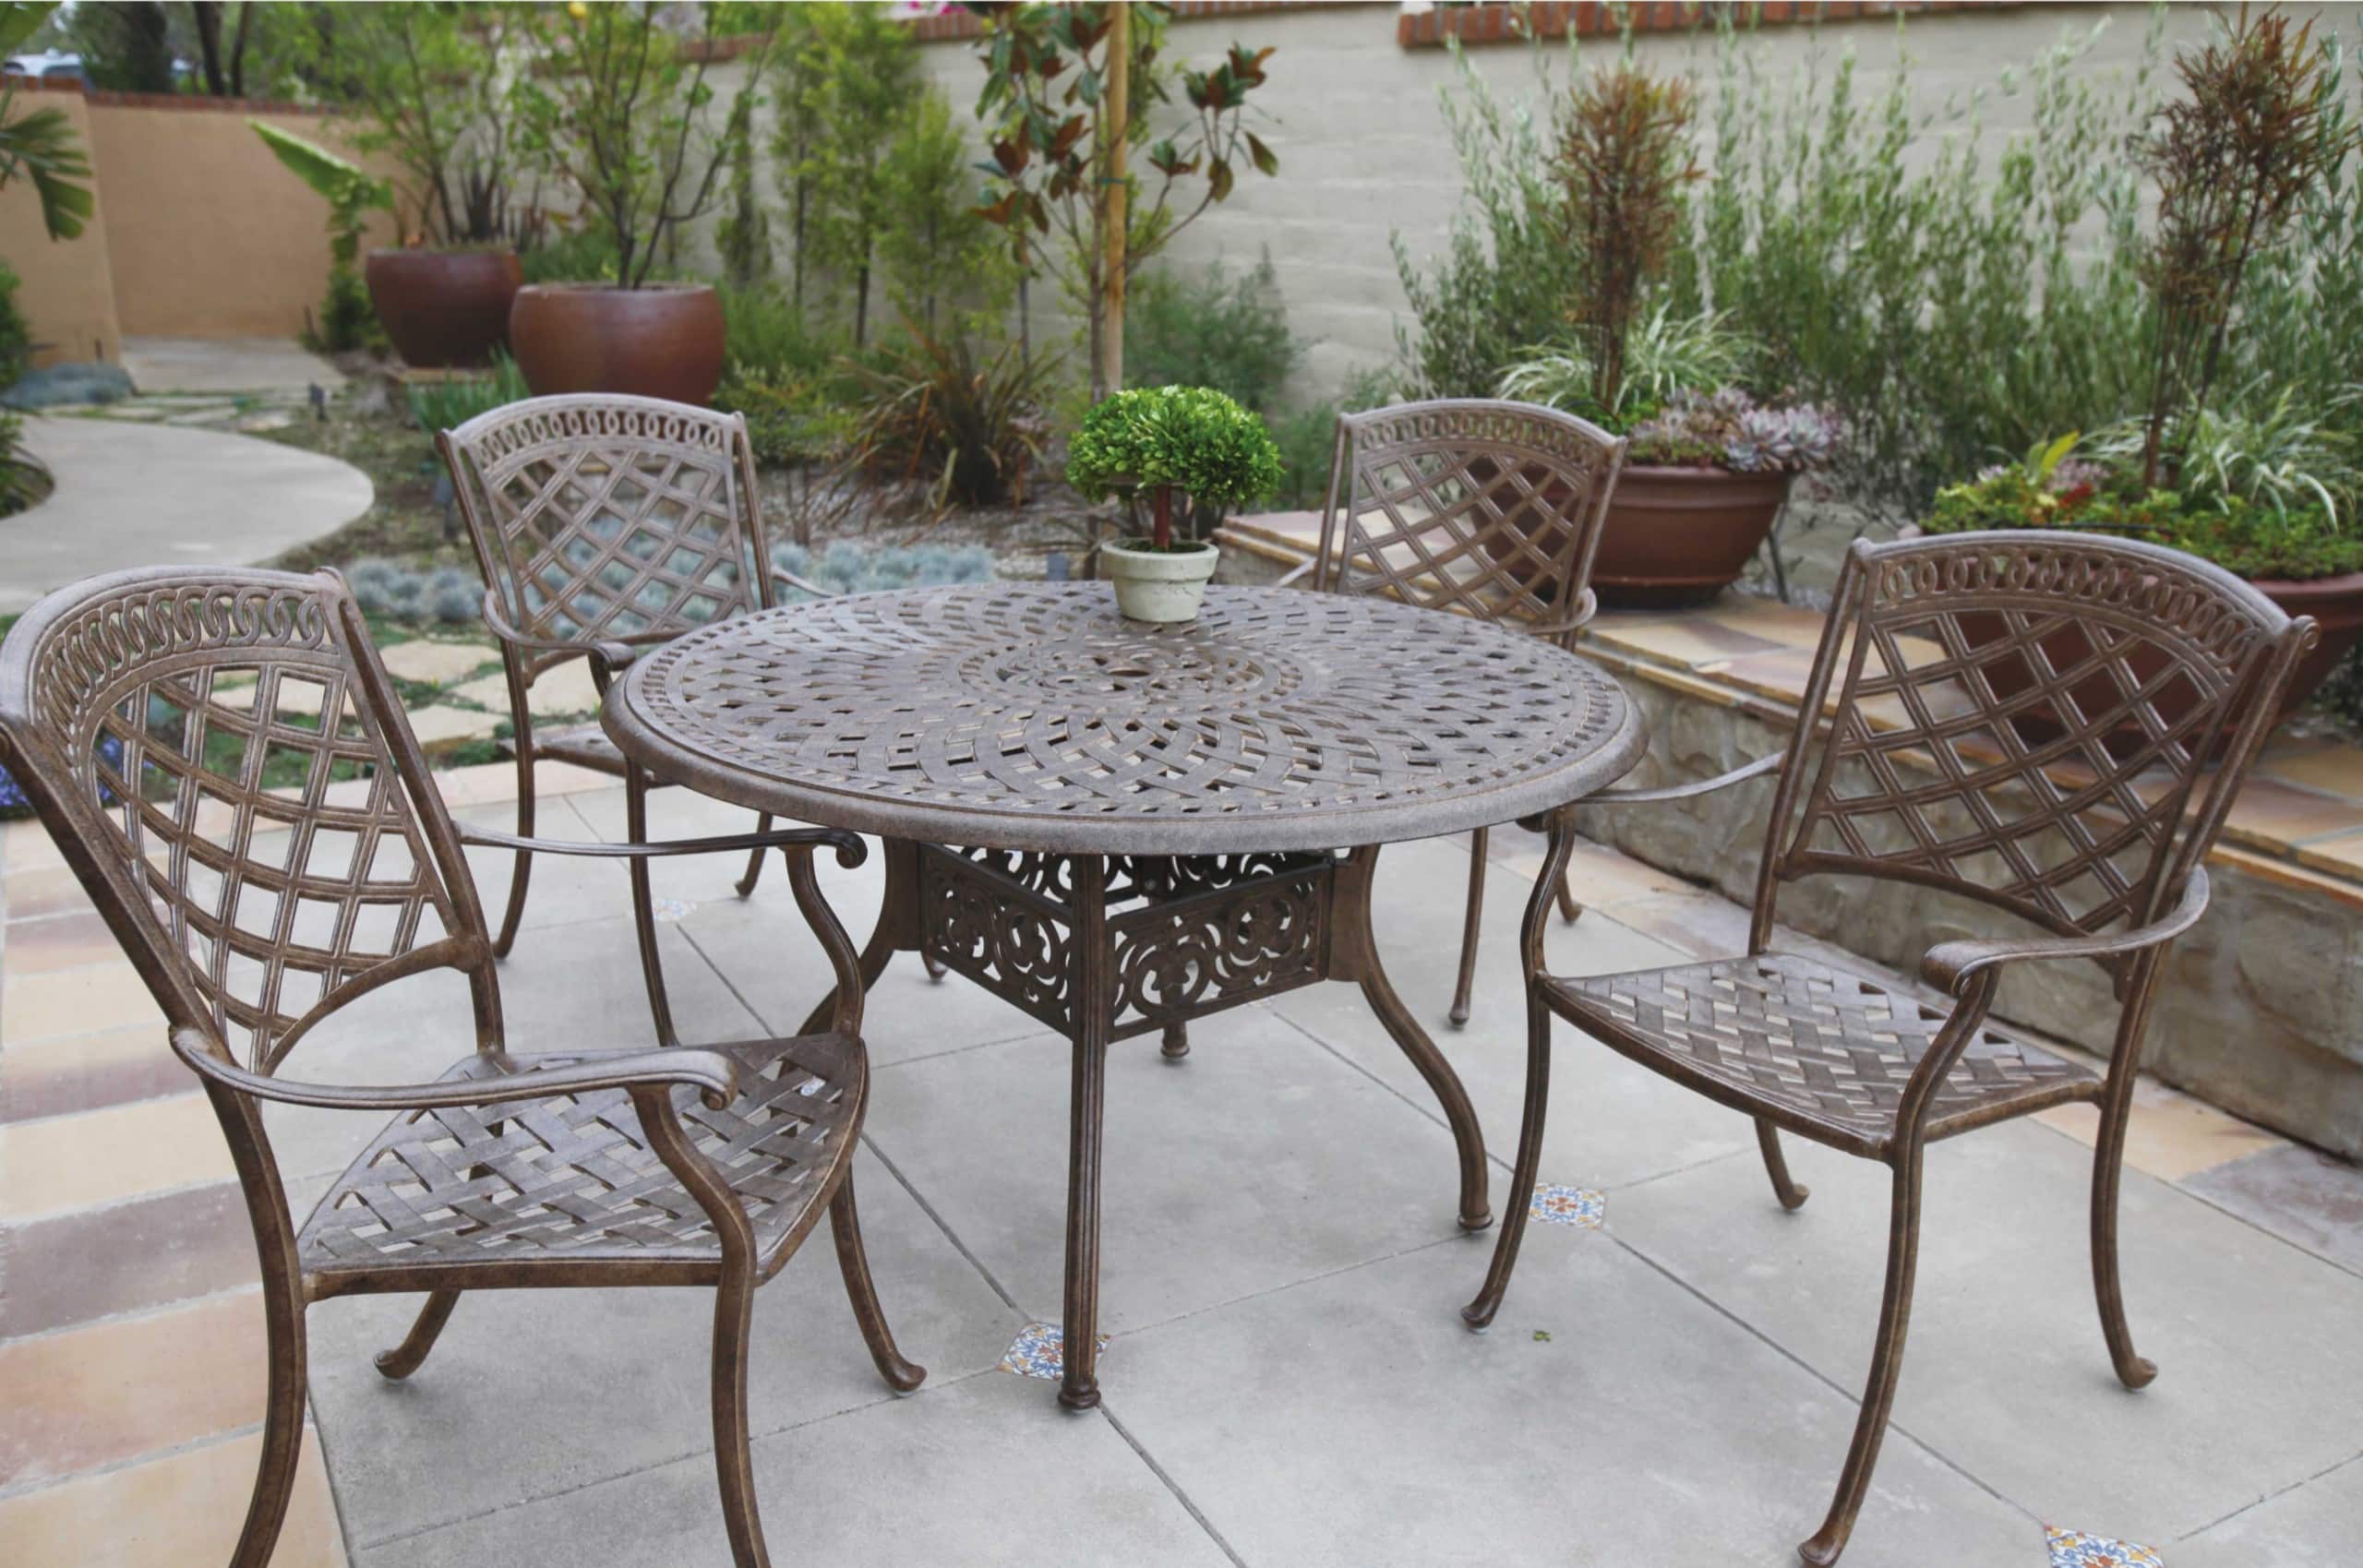 How To Remove Rust From Outdoor Furniture